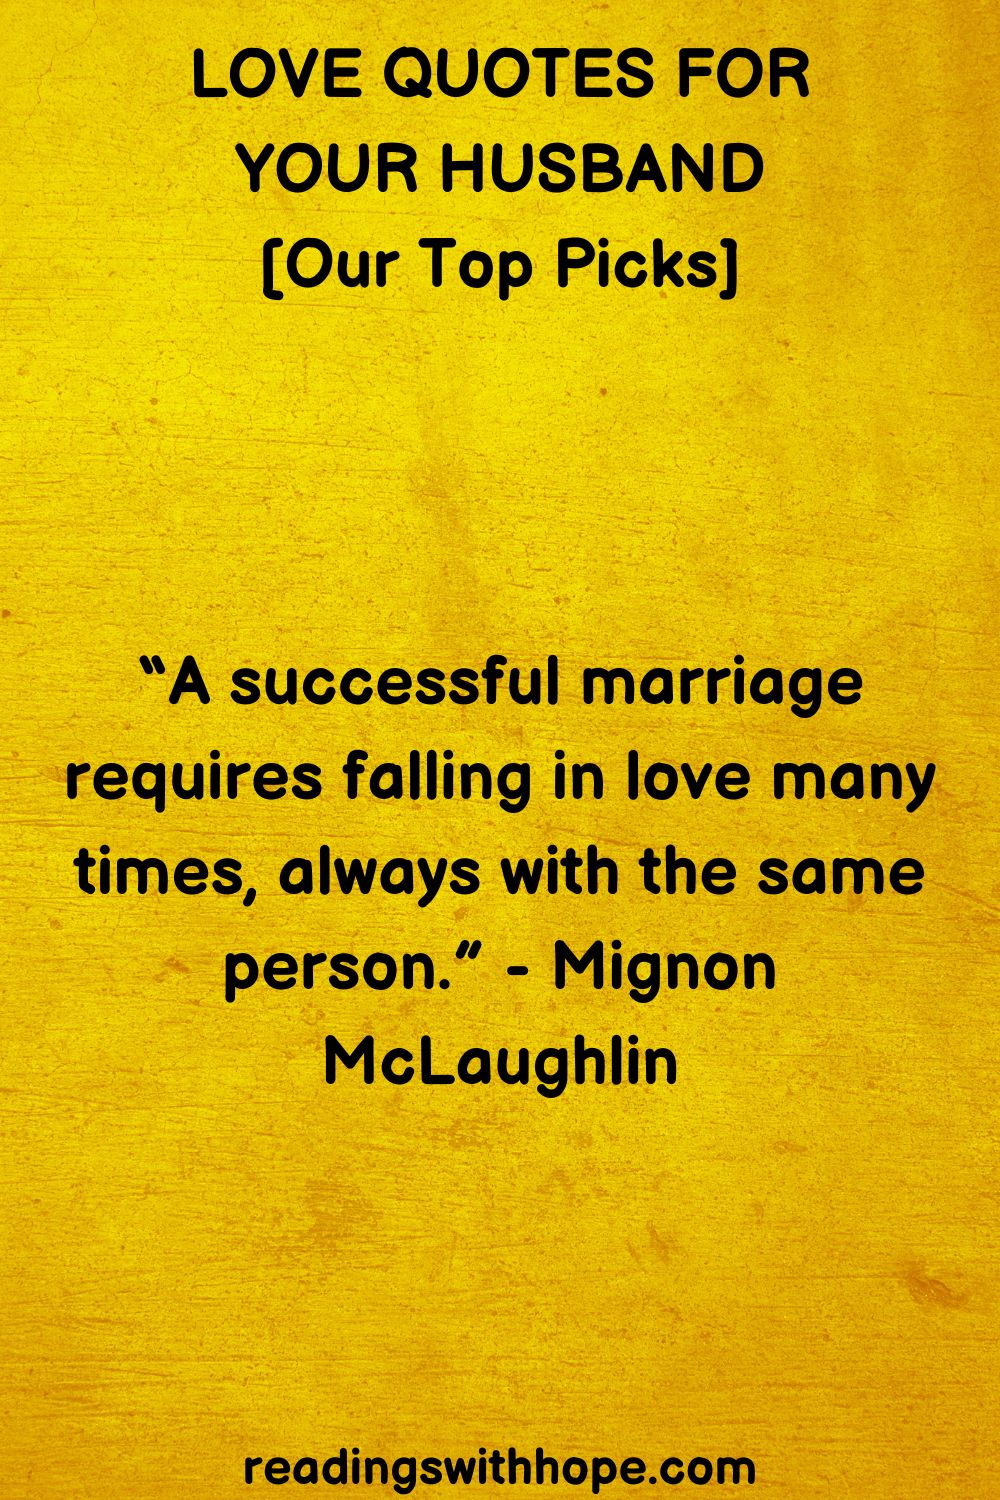 Love Quotes for Your Husband